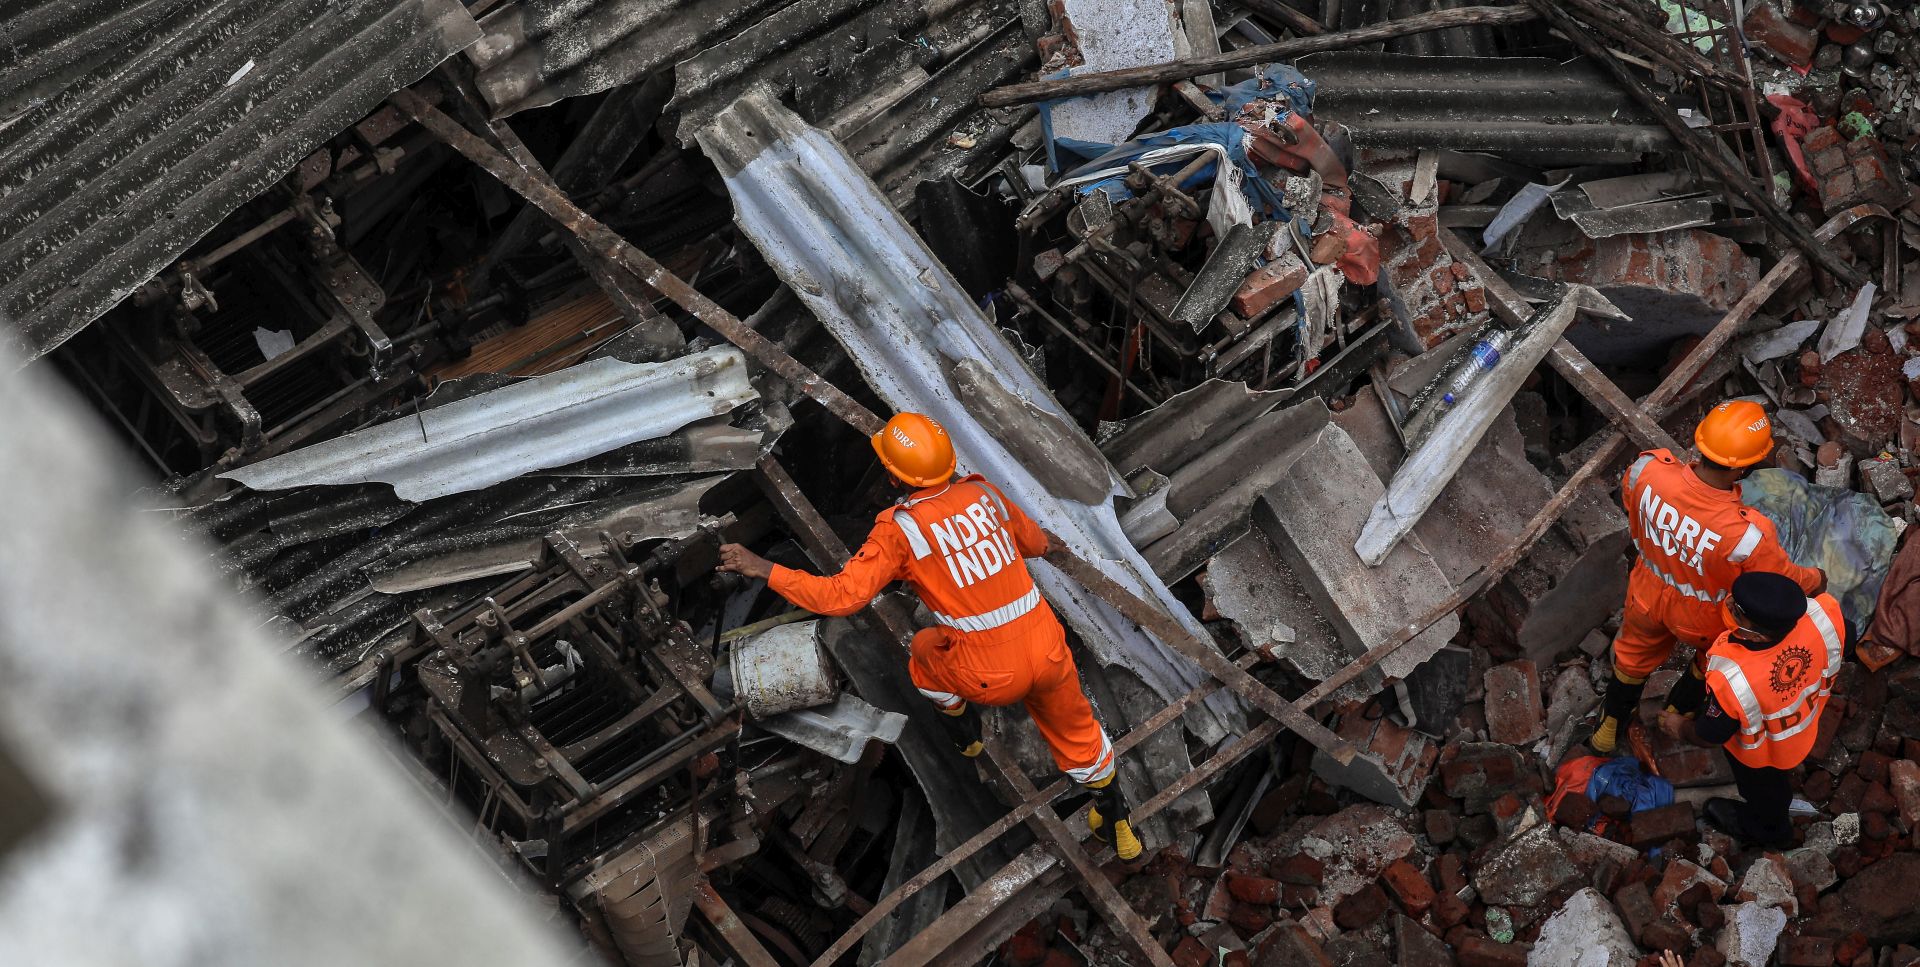 epa08685598 National Disaster Response Force (NDRF) personnel work in the aftermath of a residential building's collapse in Bhiwandi, outskirts of Mumbai, India, 21 September 2020. According to reports, at least 10 people died and several are feared to be trapped under the rubble of the three-storey residential building.  EPA/DIVYAKANT SOLANKI